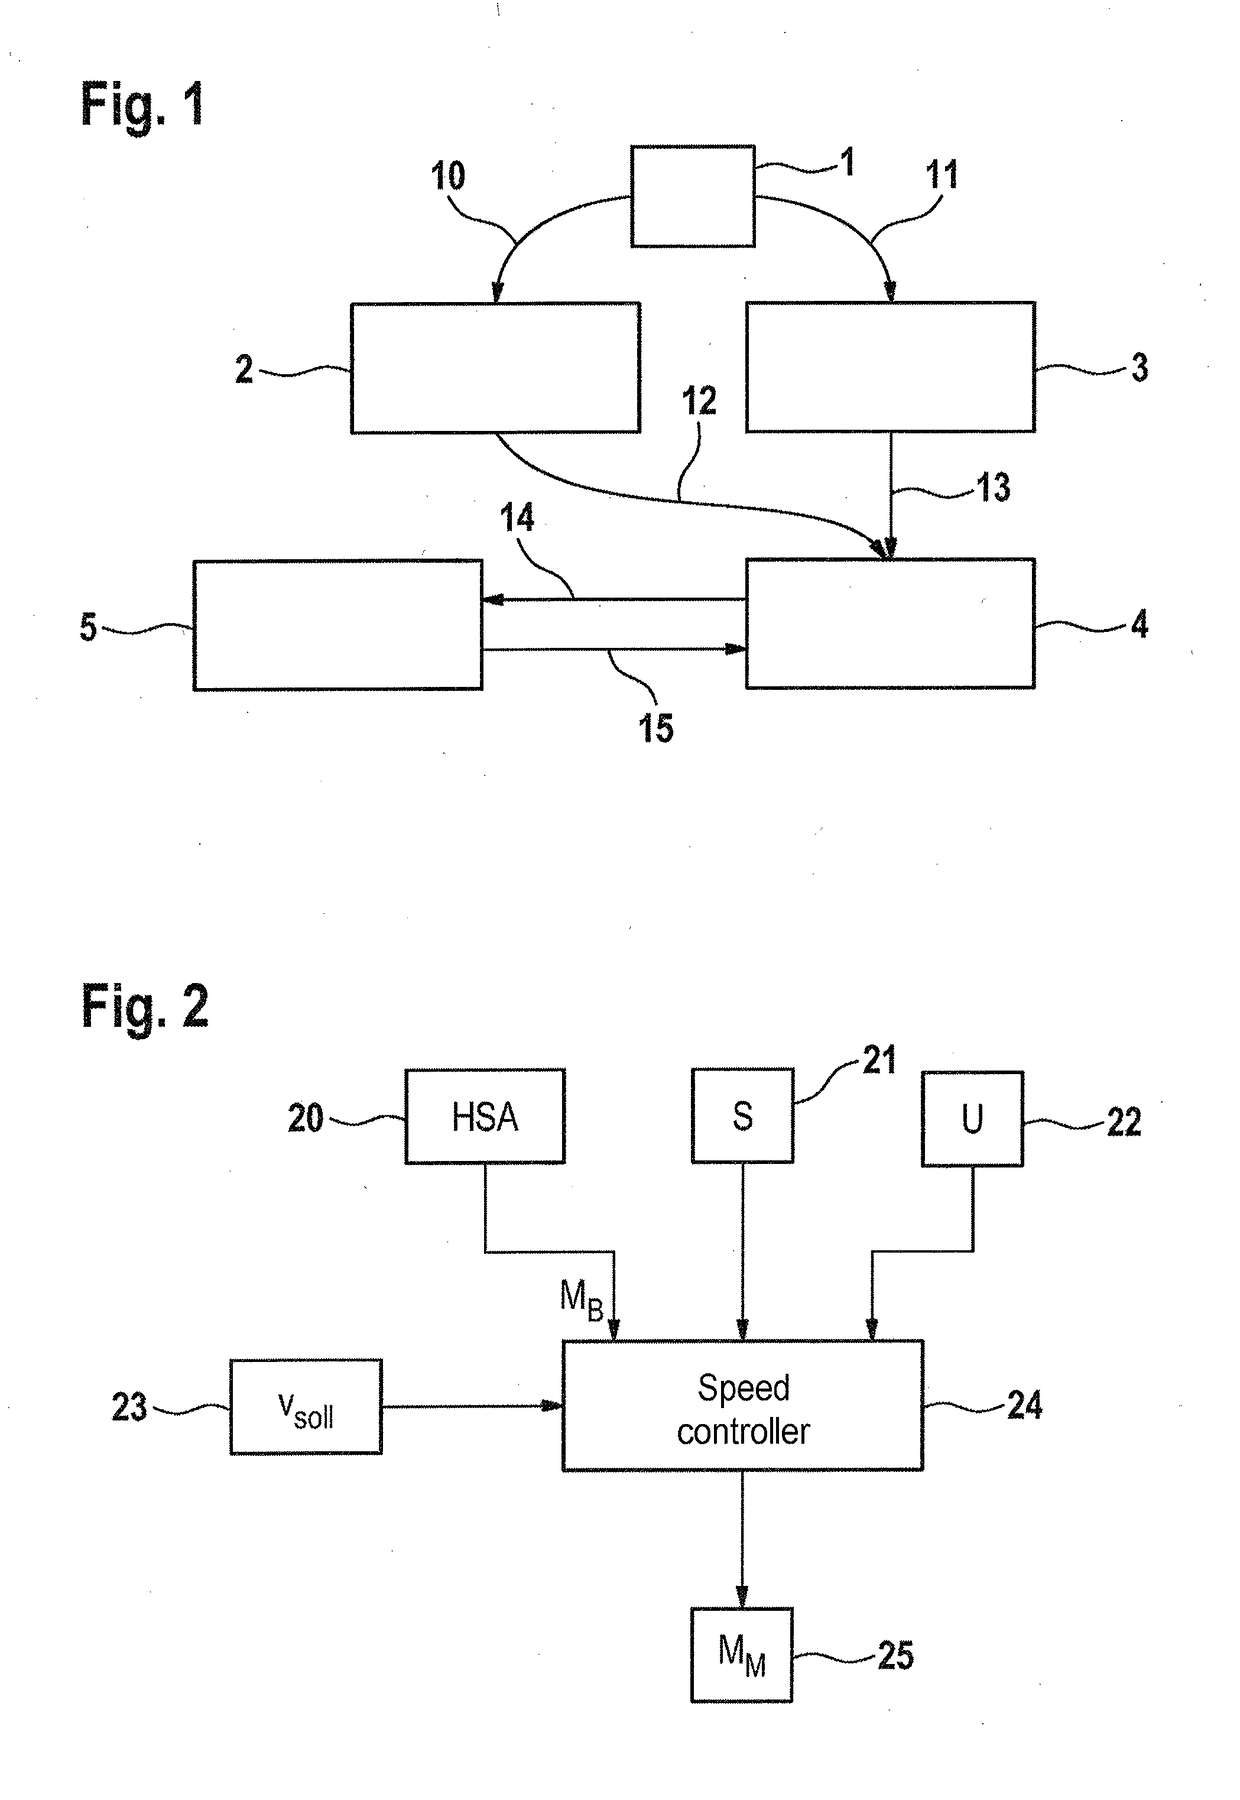 Method for a speed controller